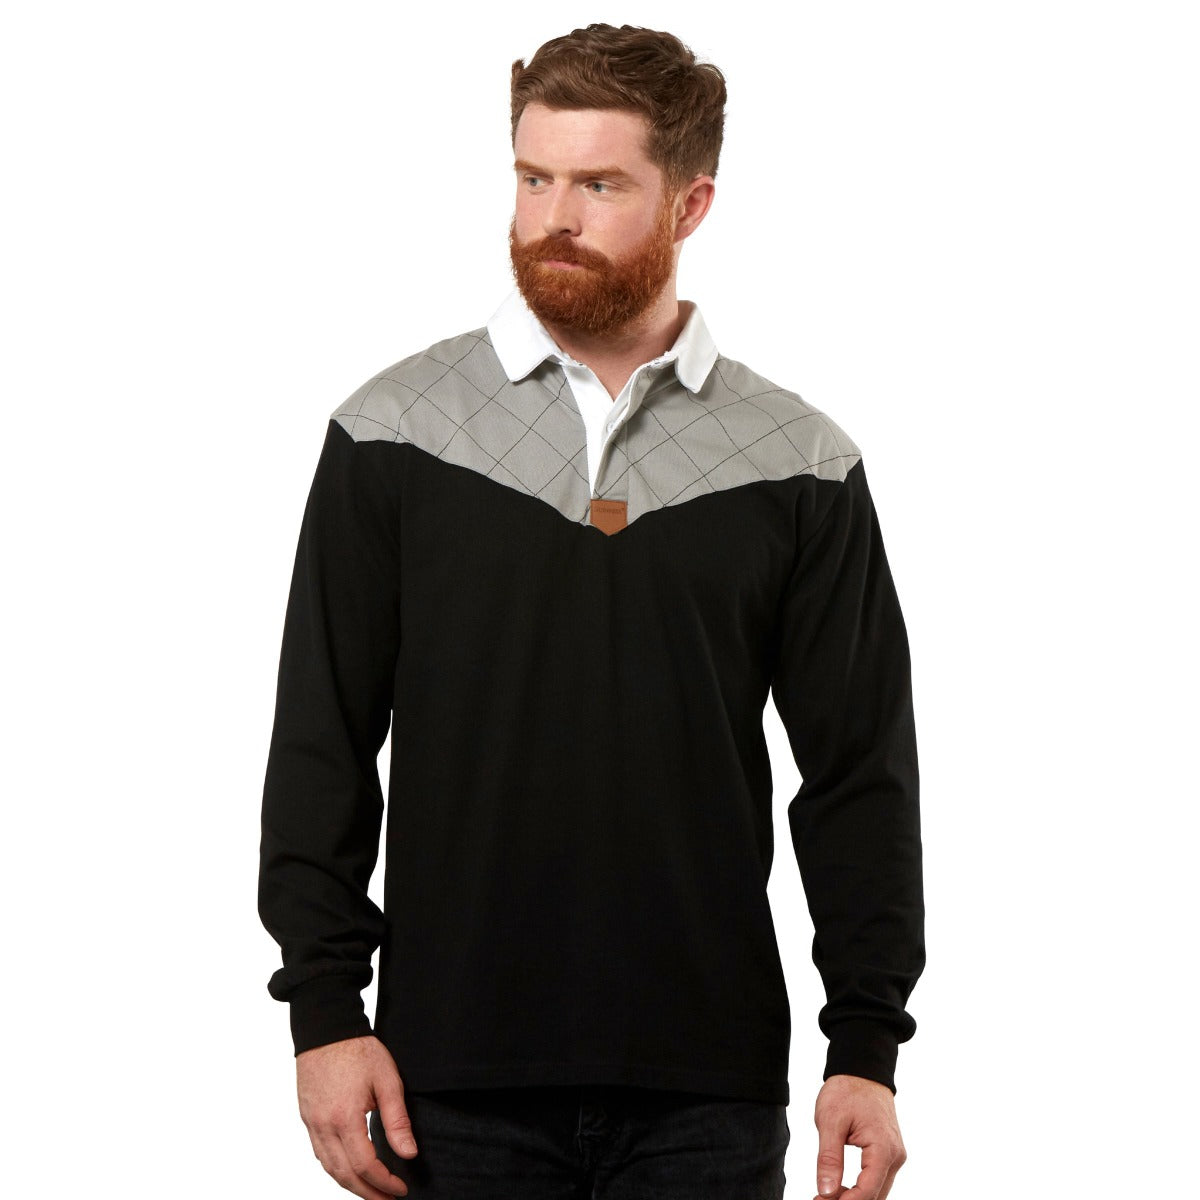 Guinness Heritage Charcoal Grey and Black Long Sleeve Rugby Jersey